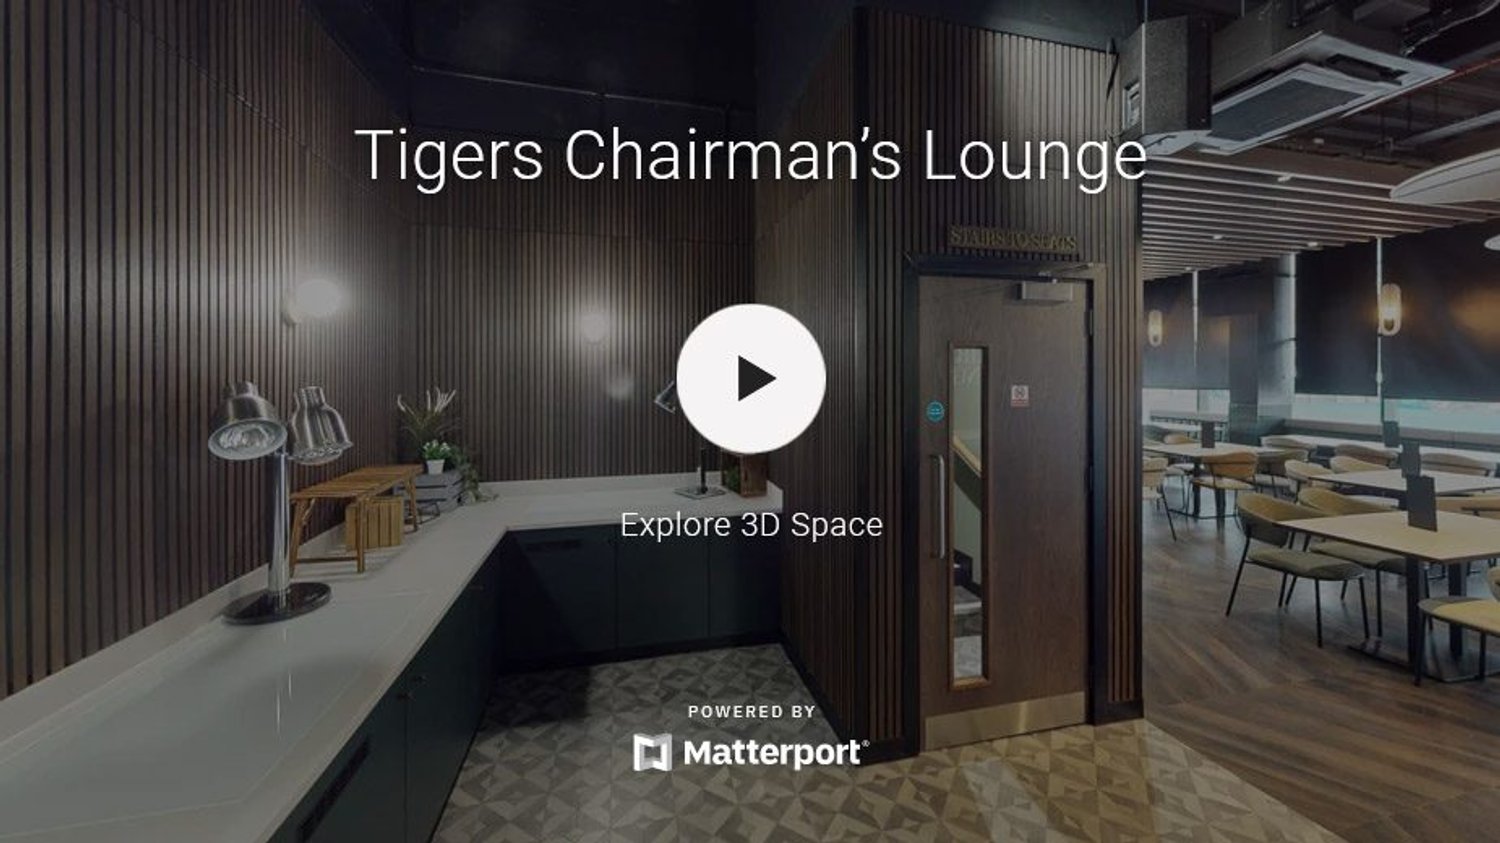 Leicester Tigers Chairman's Lounge - Virtual Tour